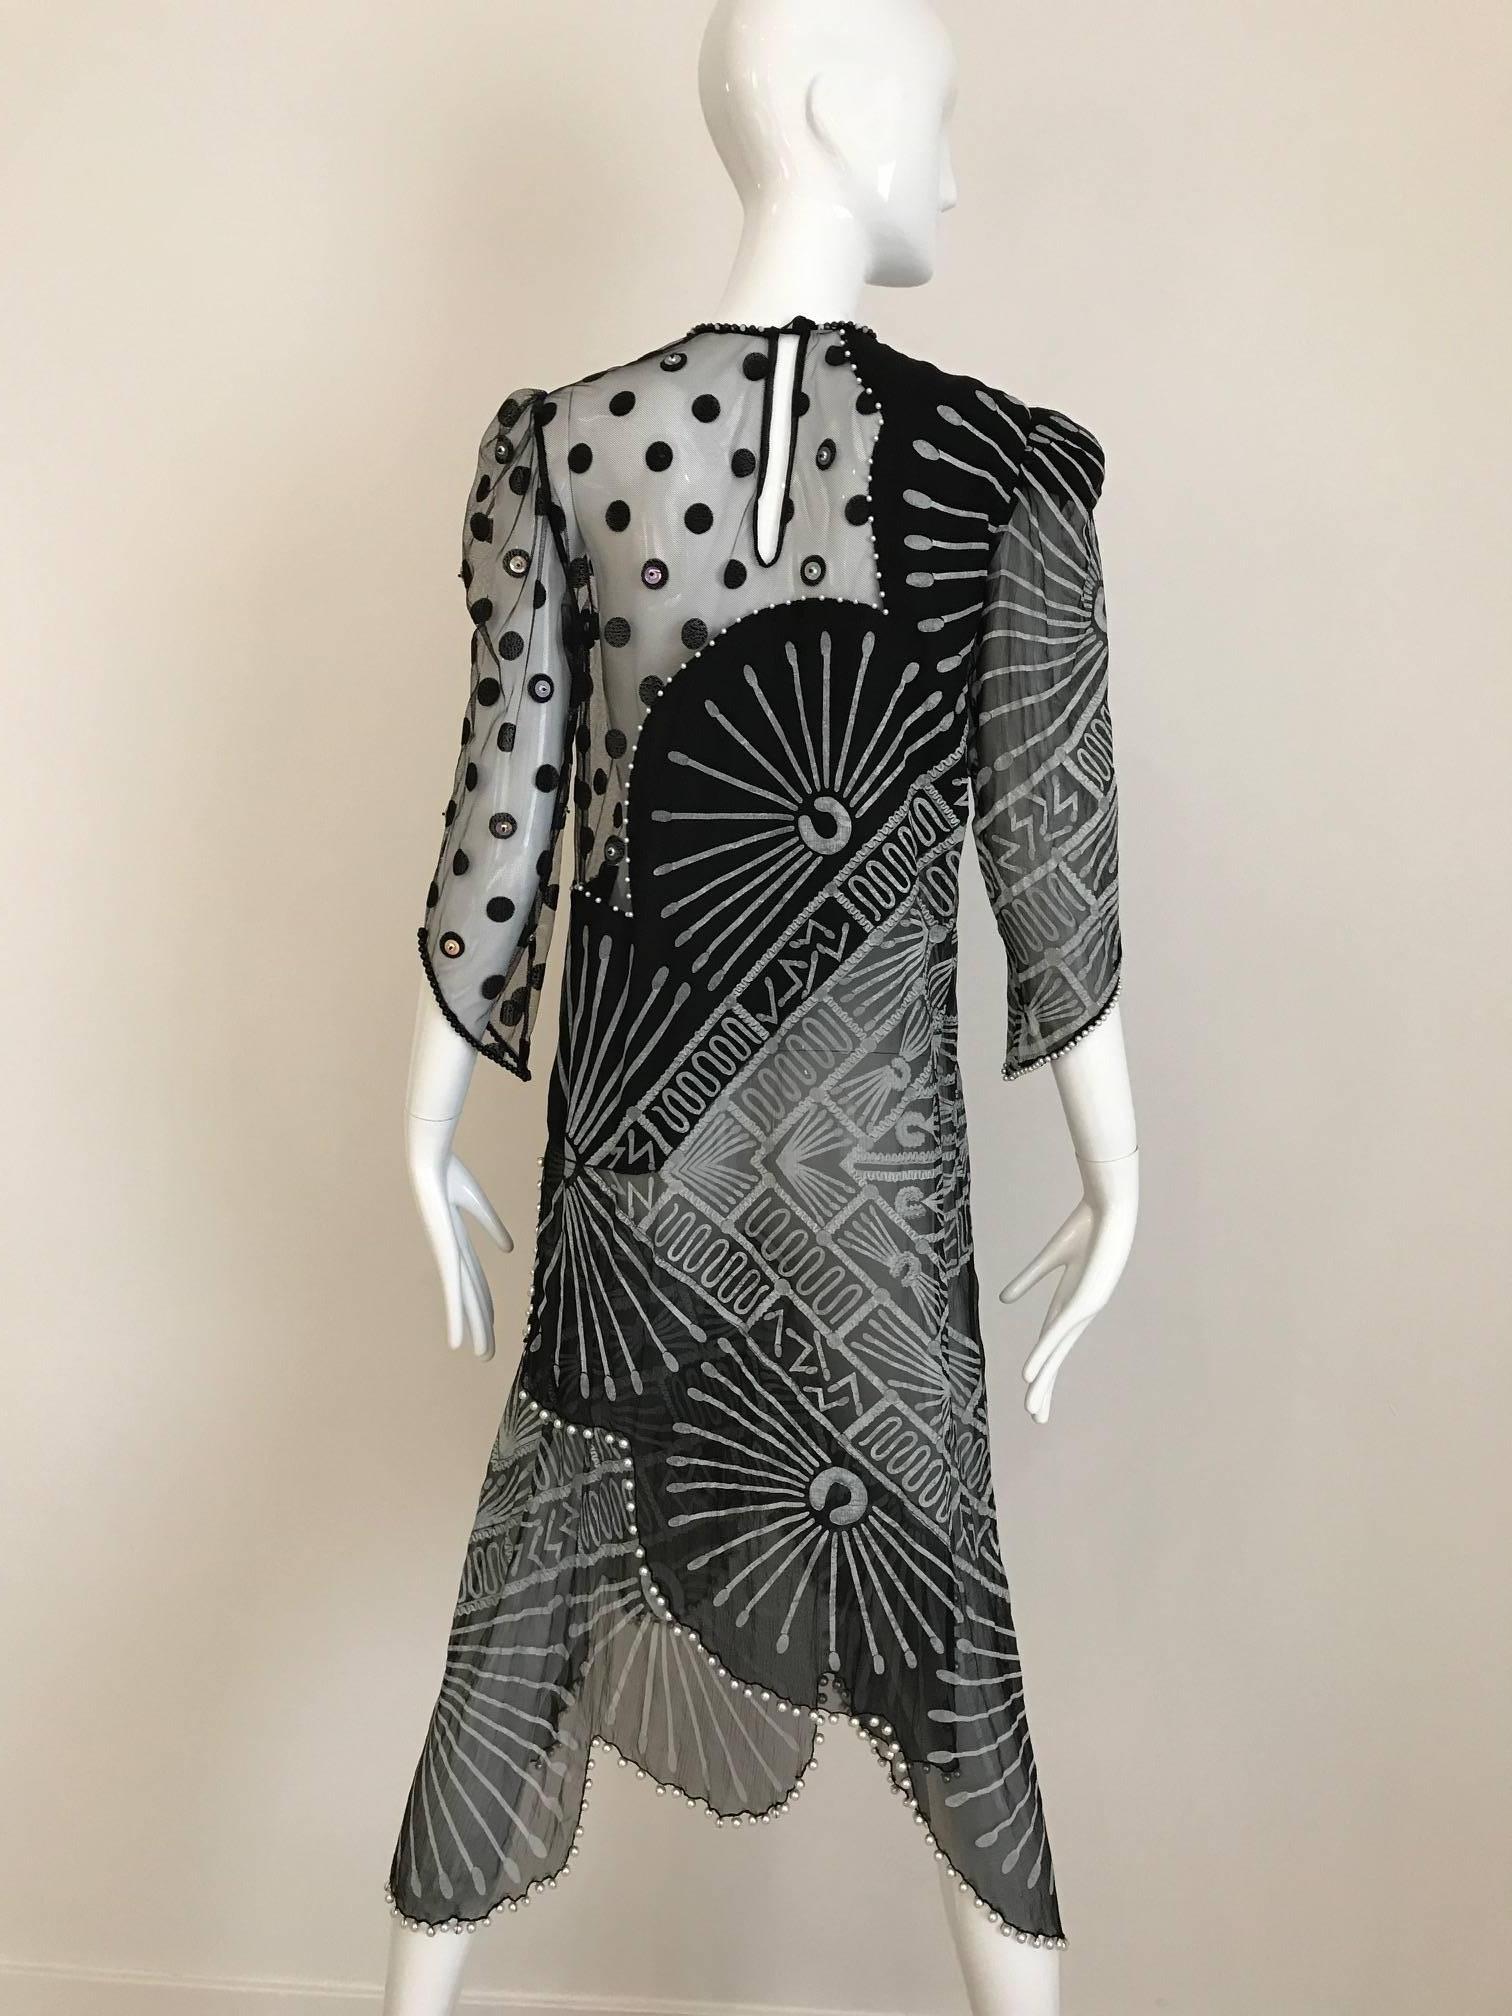 Vintage 1980s Zandra Rhodes black and gray print dress with with pearls 1